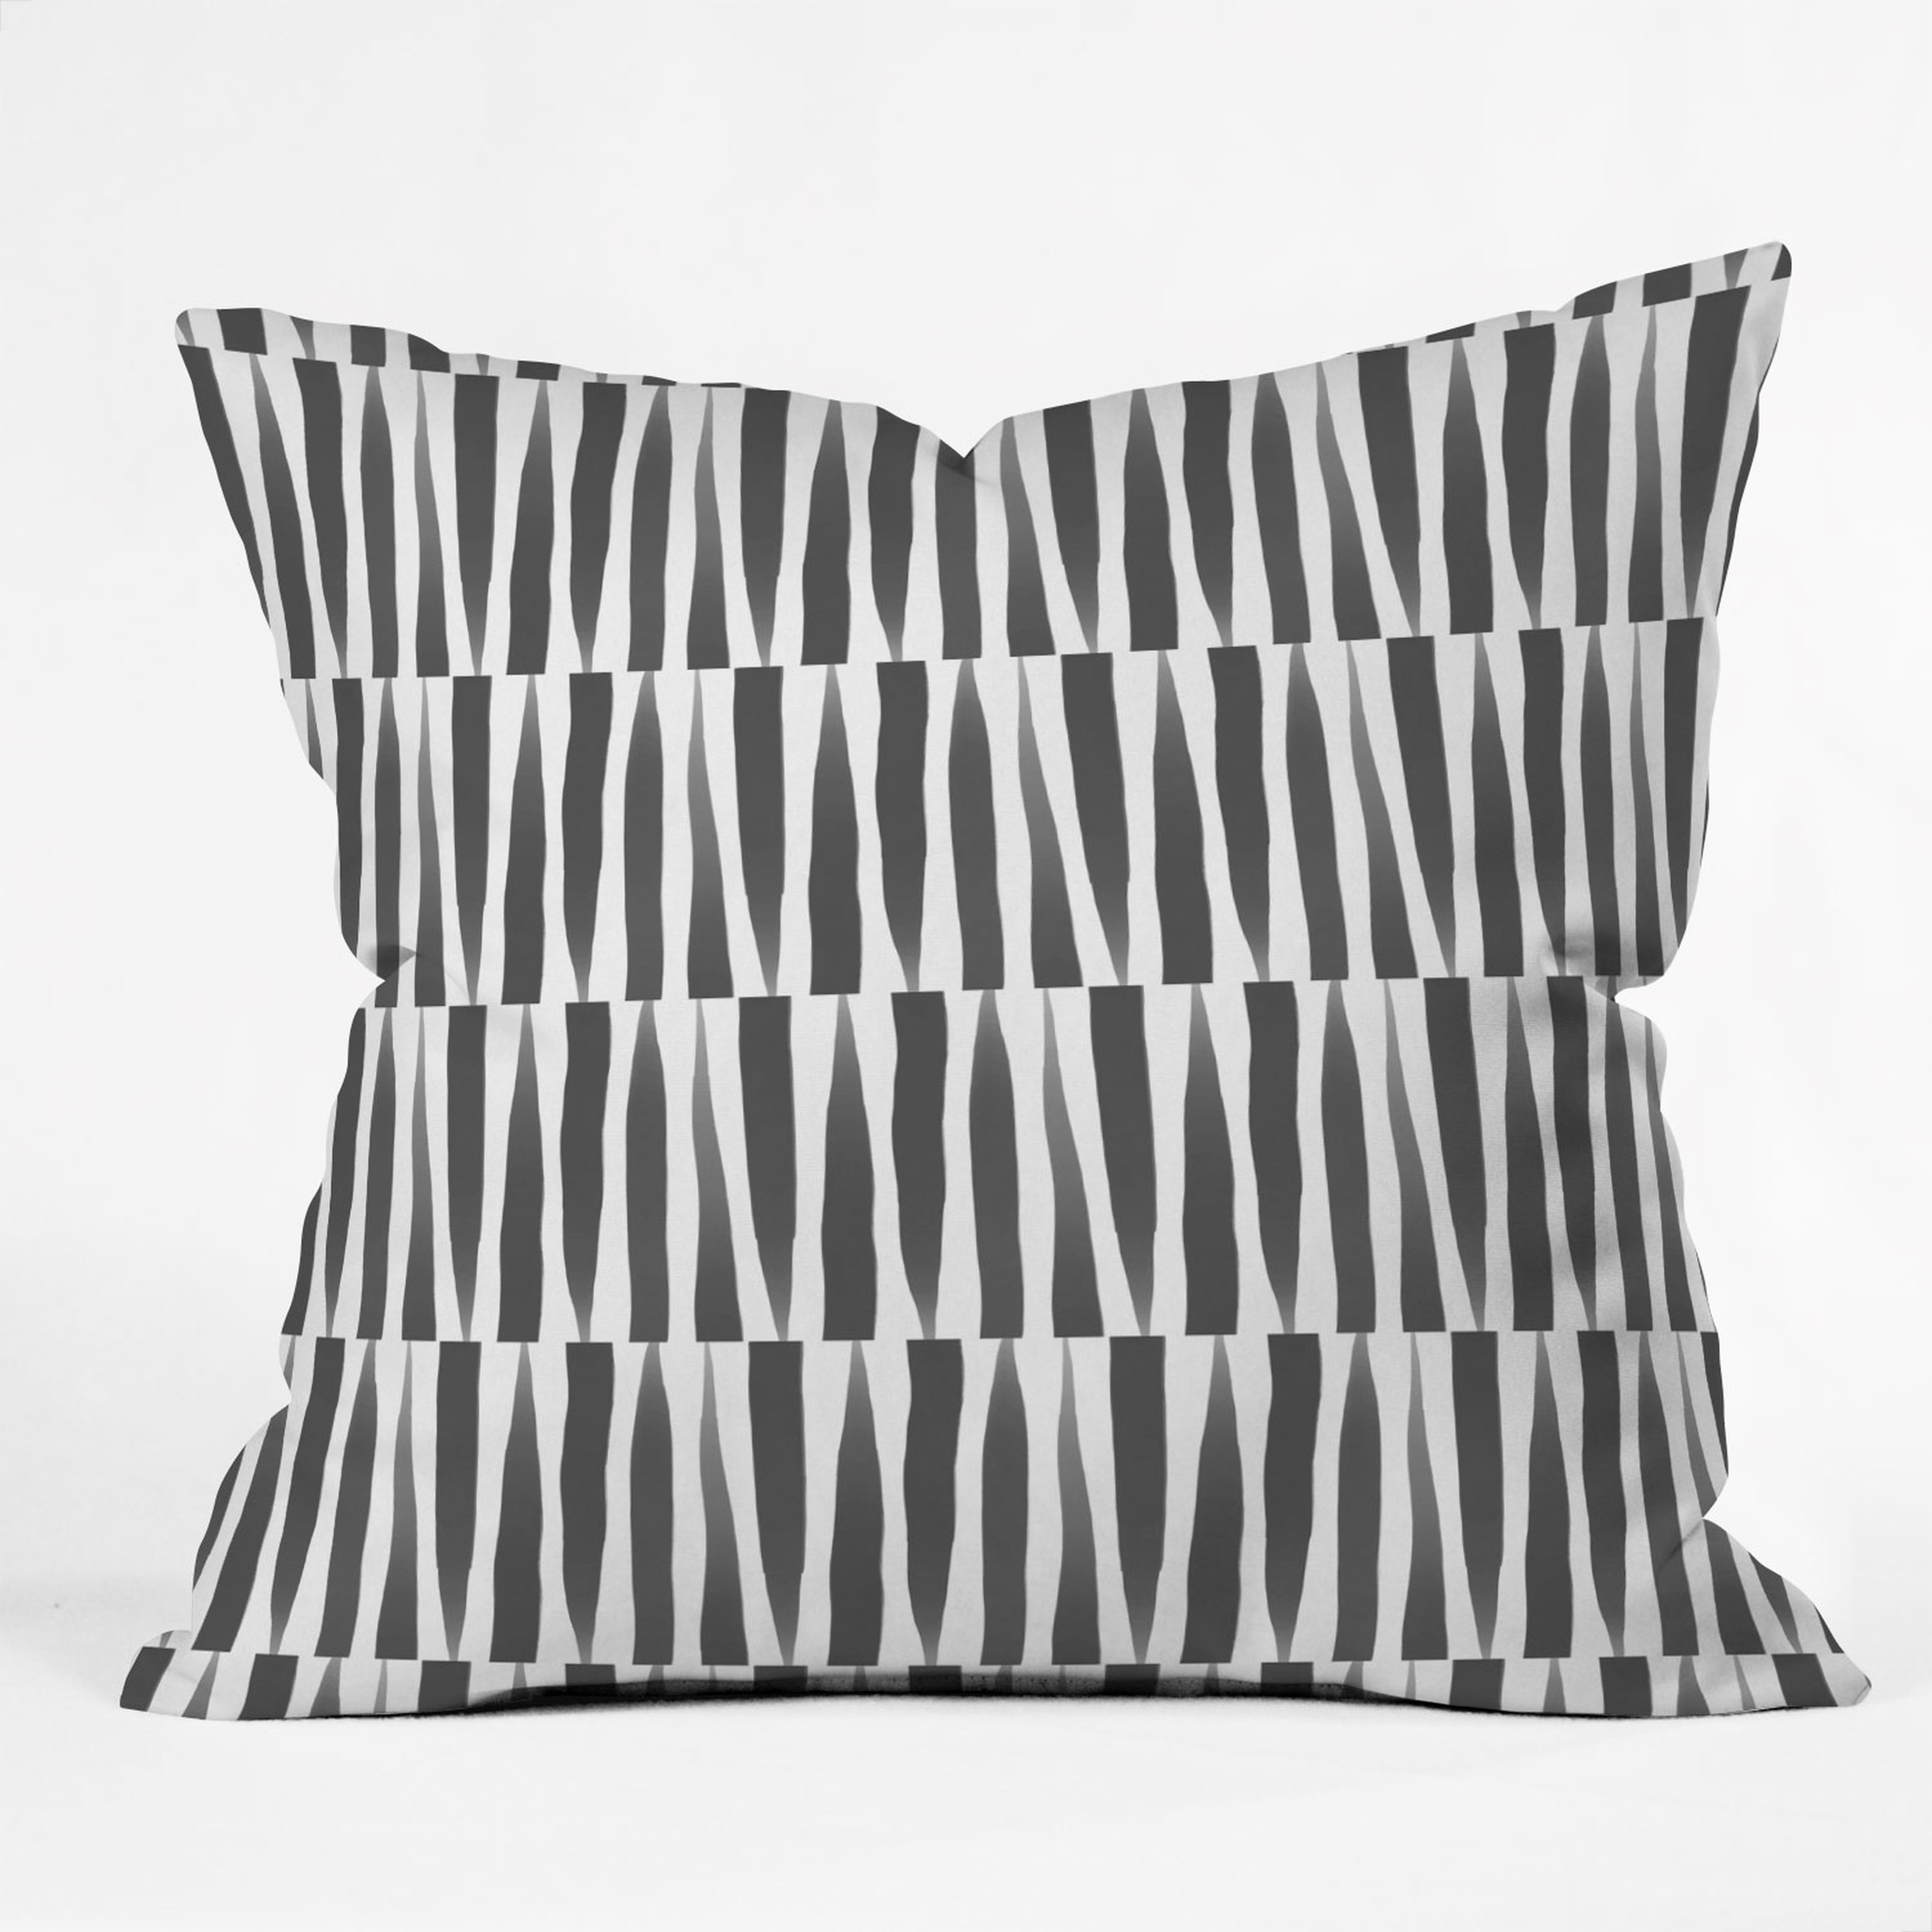 Bw Abstract Theme by Emanuela Carratoni - Outdoor Throw Pillow 18" x 18" - Deny Designs